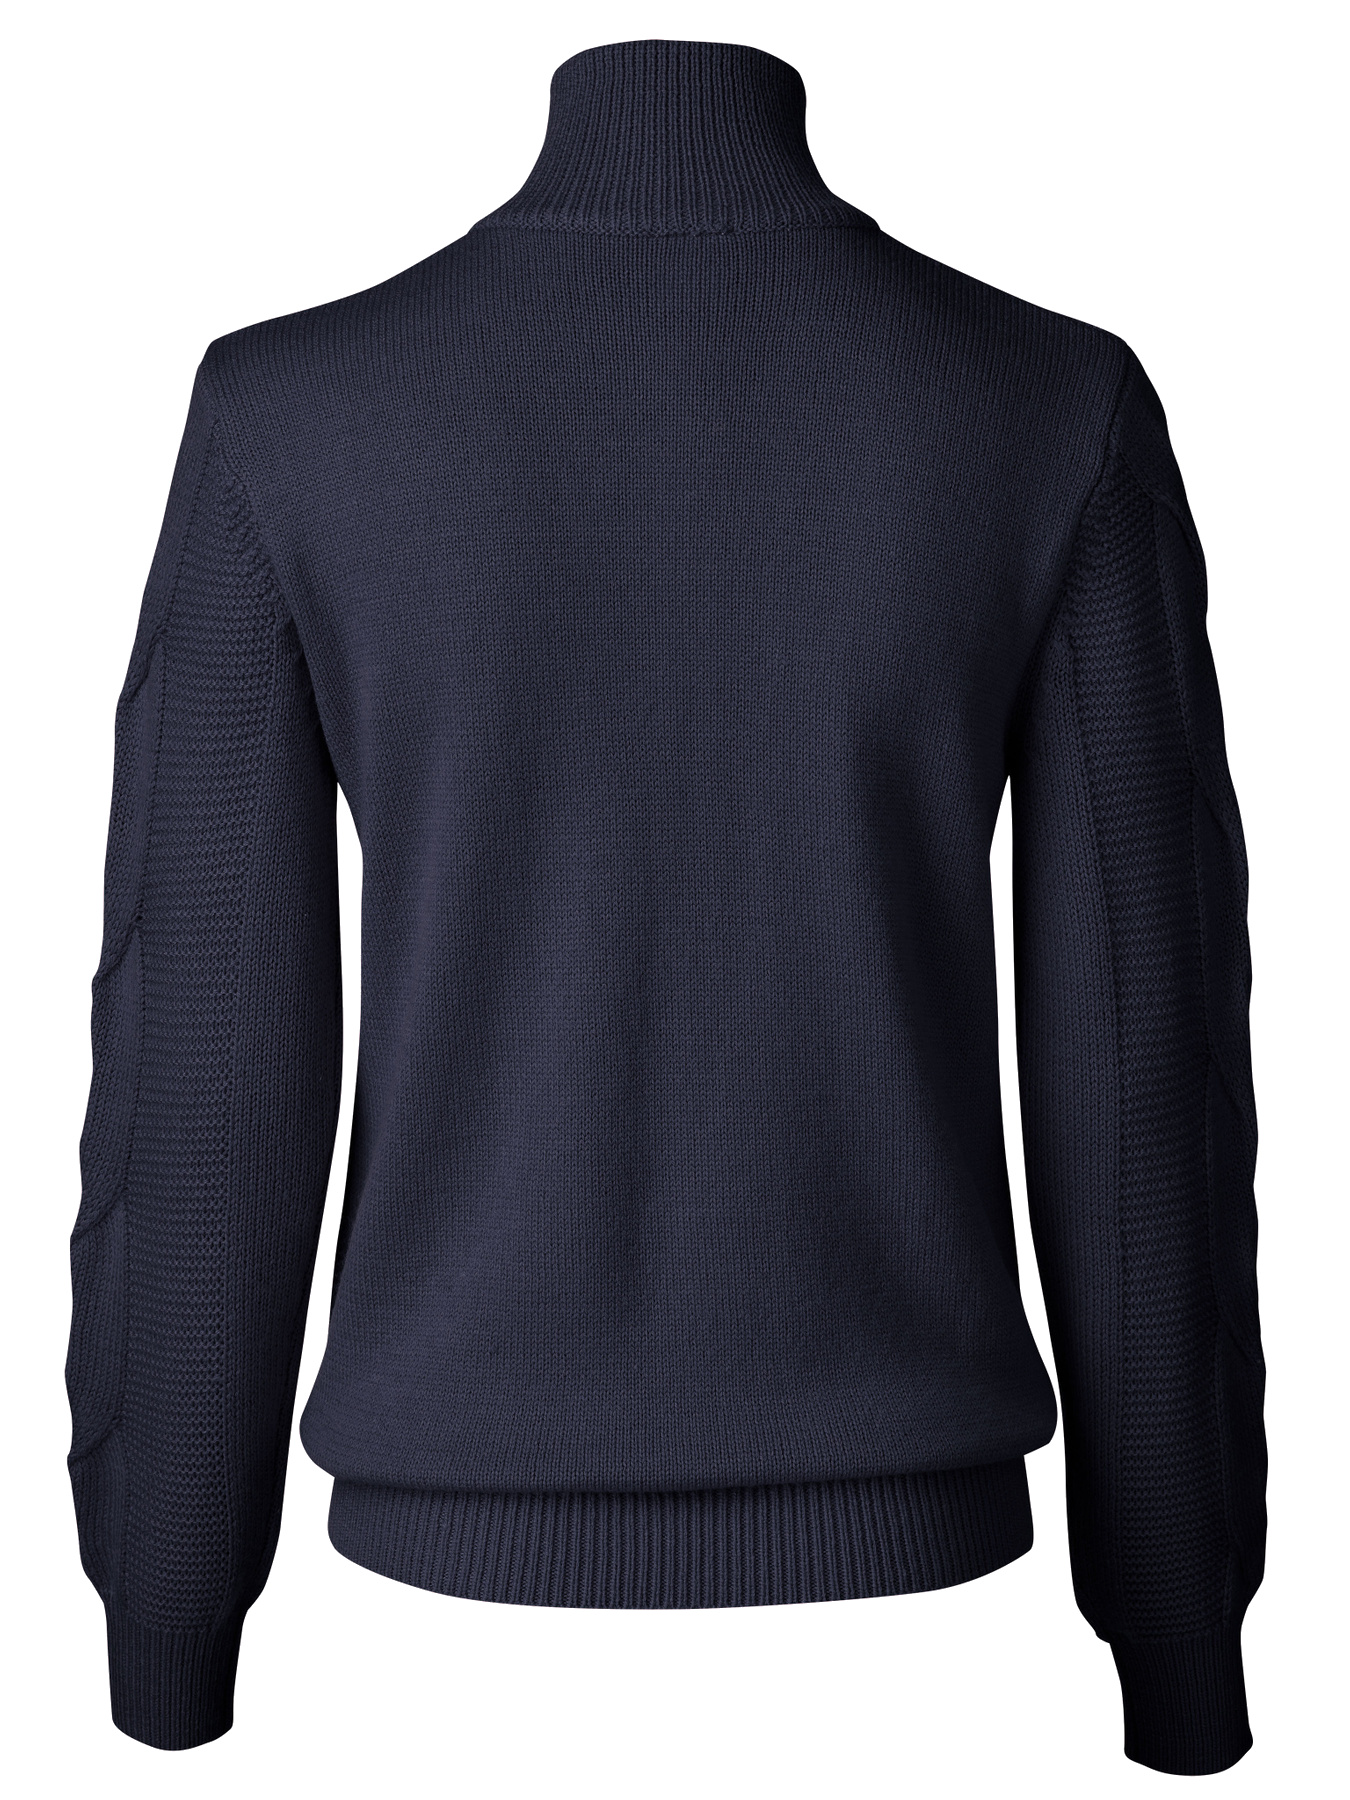 Daily Sports Addie Lined Pullover Navy